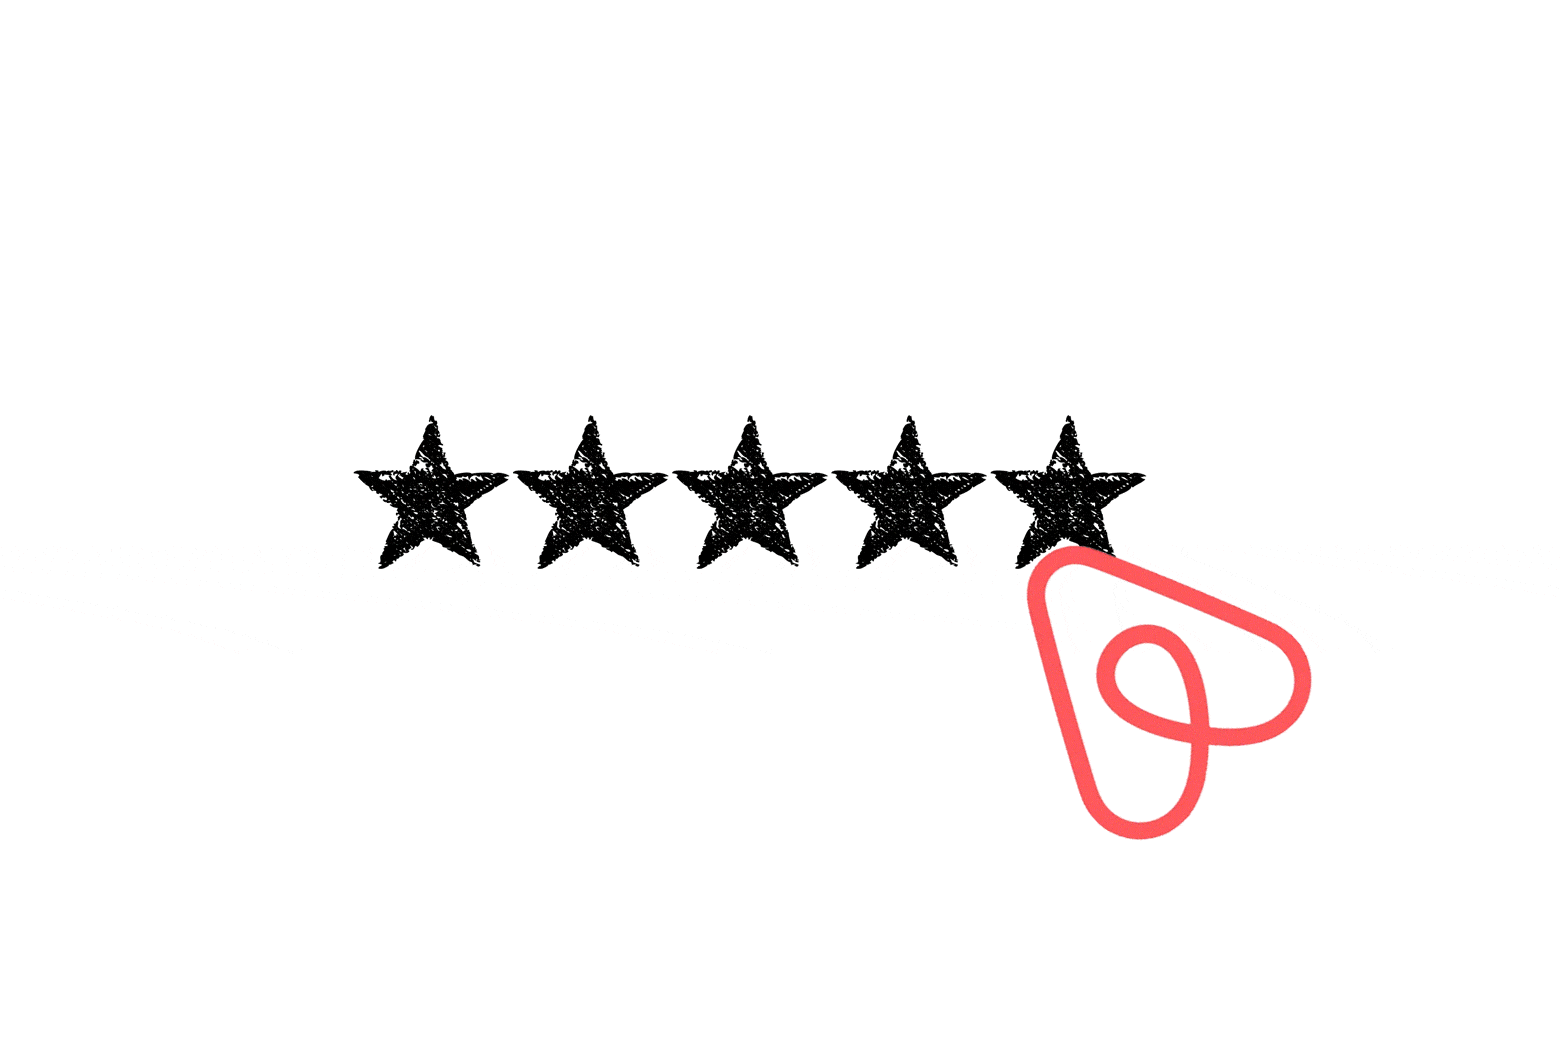 An Airbnb logo is seen erasing one star from a five-star rating.